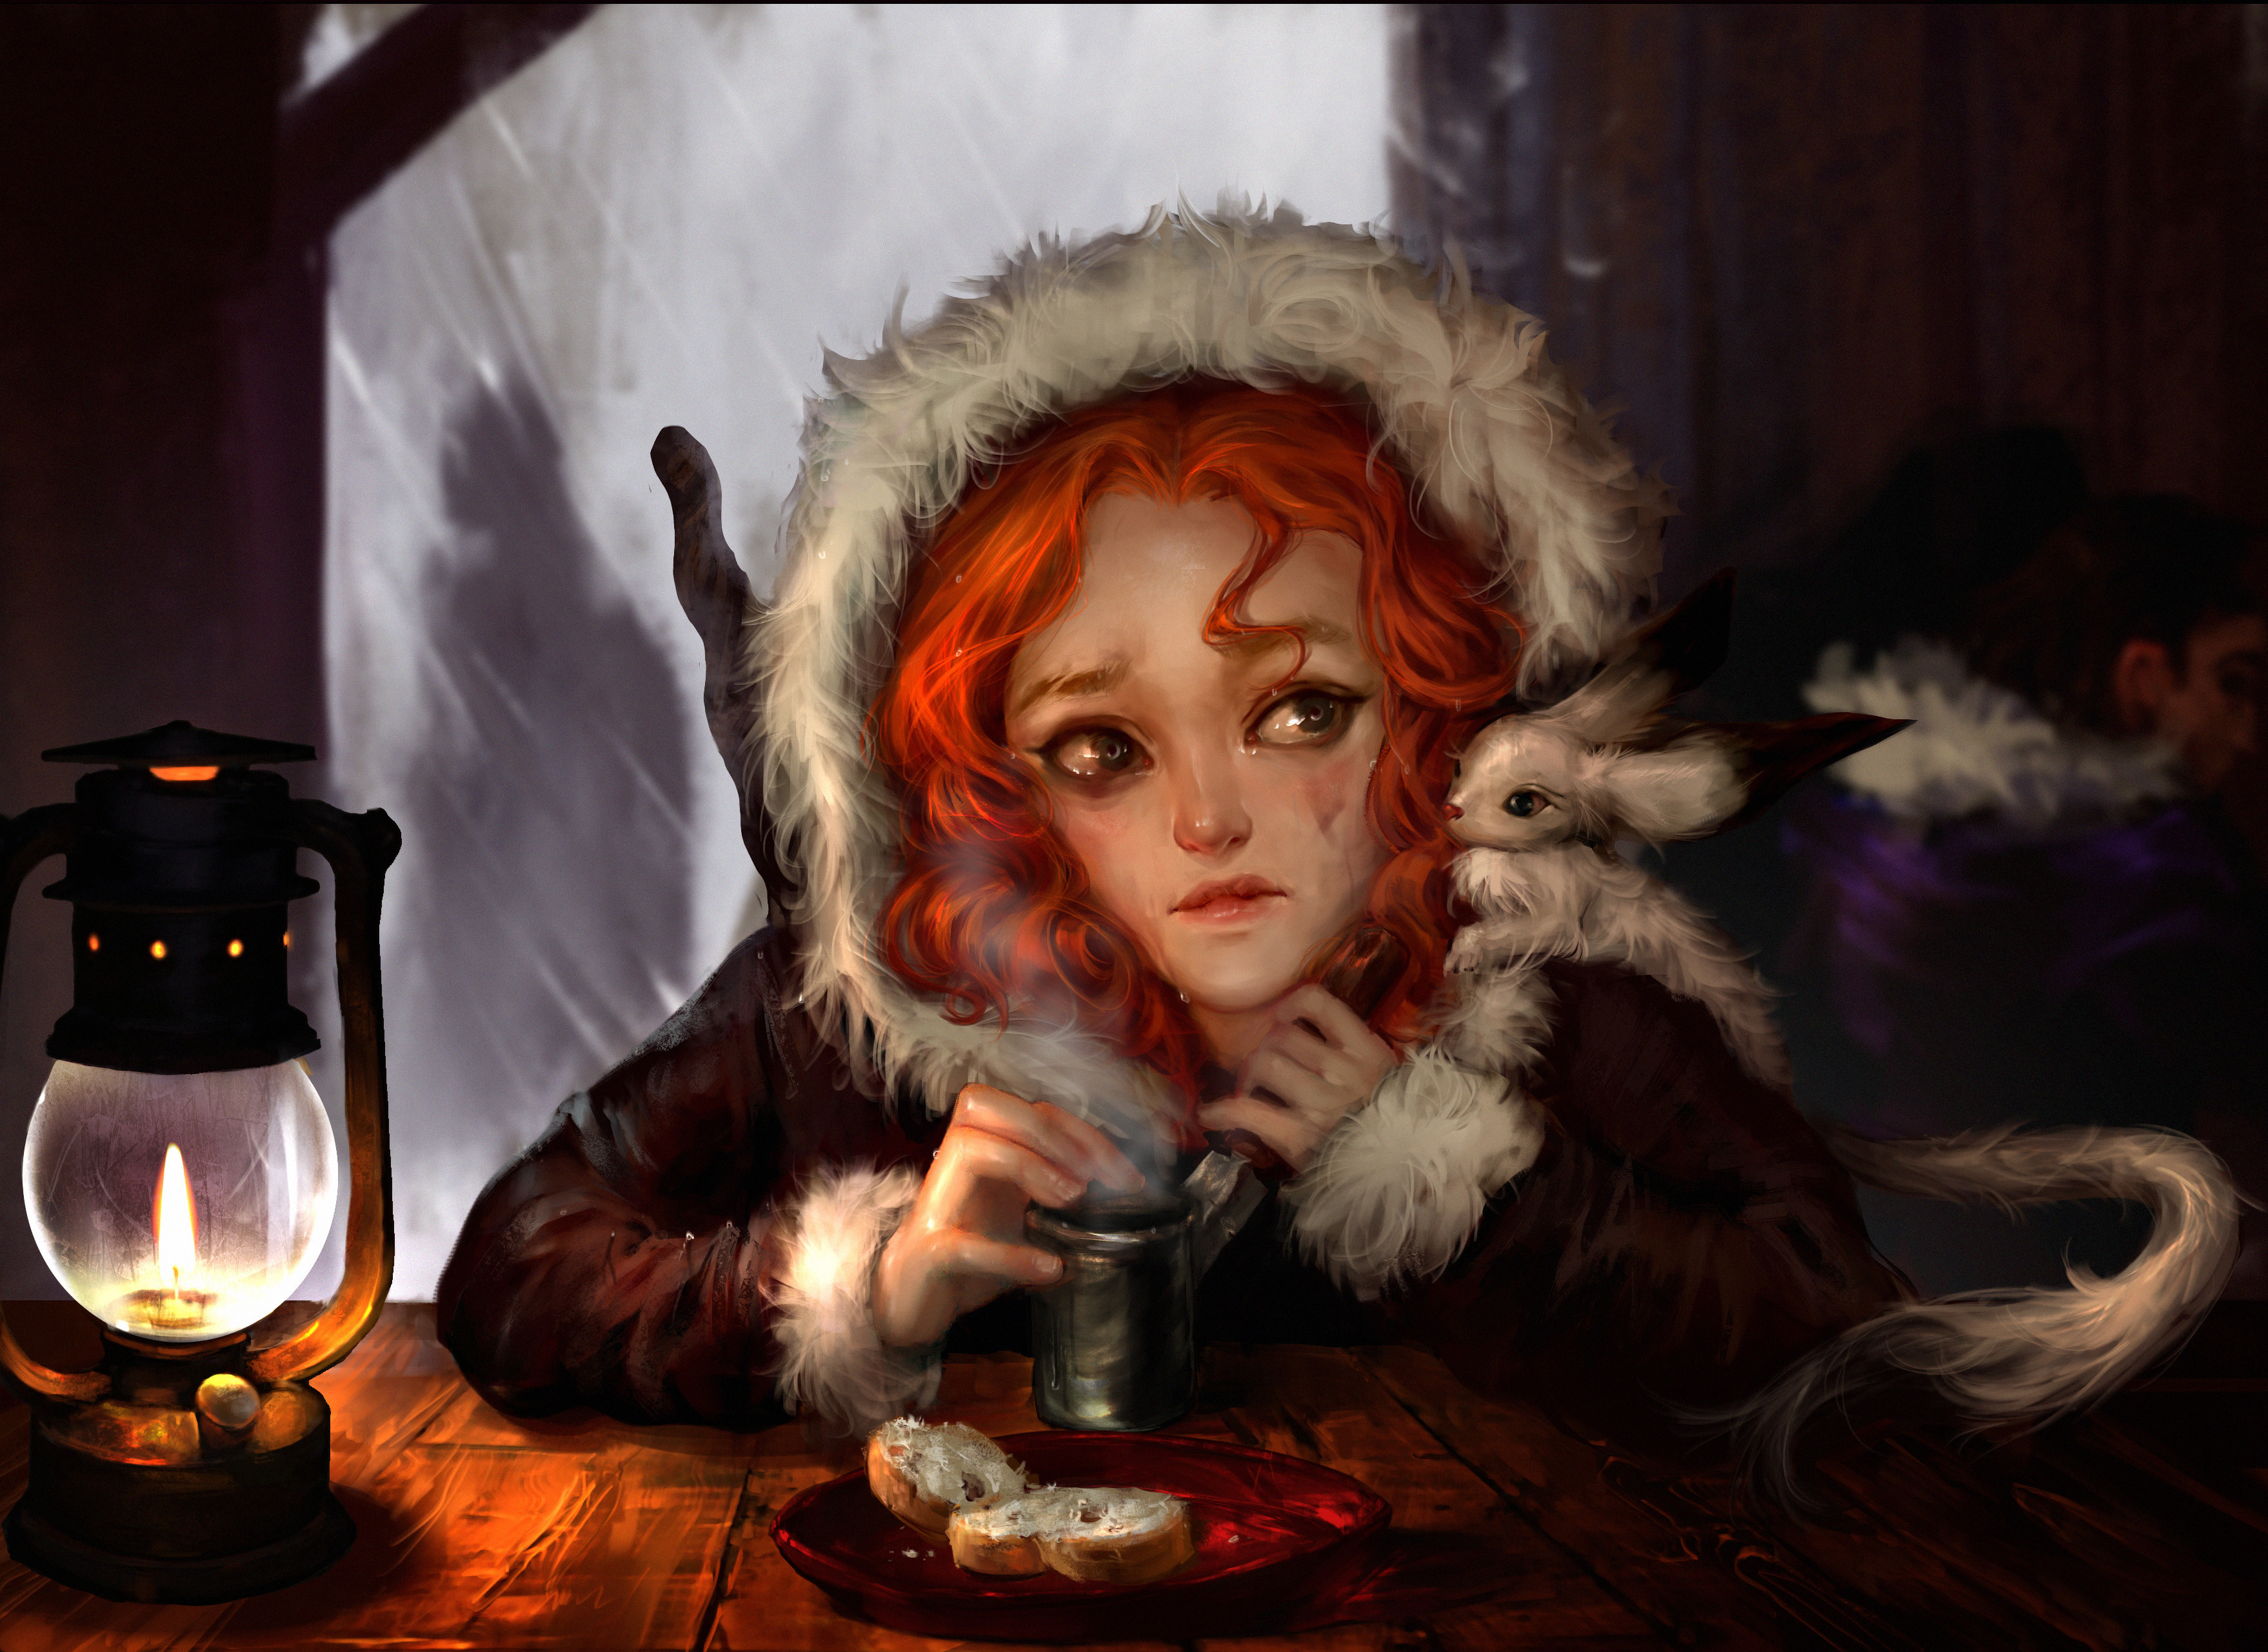 Tavern Redhead Winter Crying Cup Looking At The Side Food Digital Art Digital Painting Artwork 3516x2561